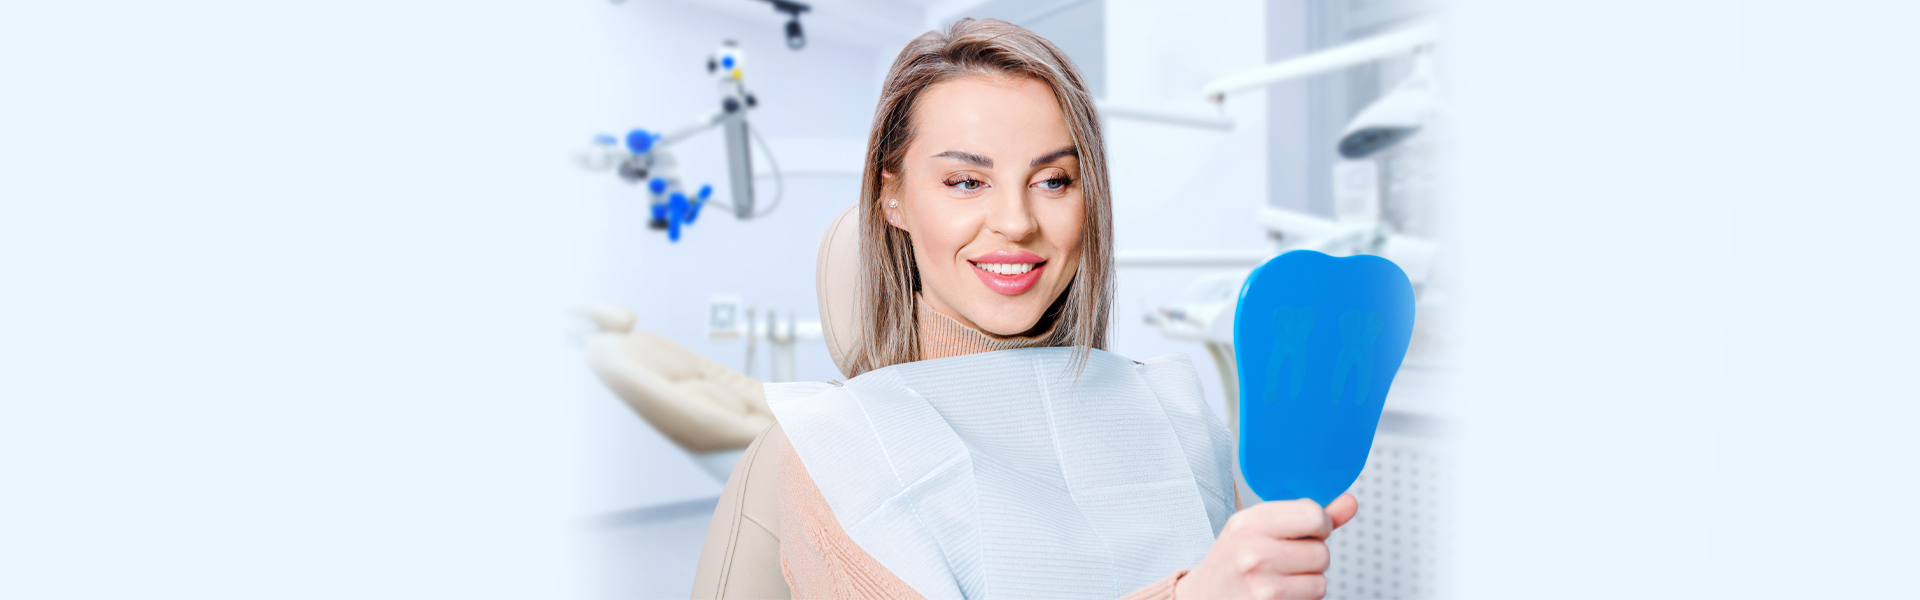 Dental Exams and Cleanings in Hackensack, NJ